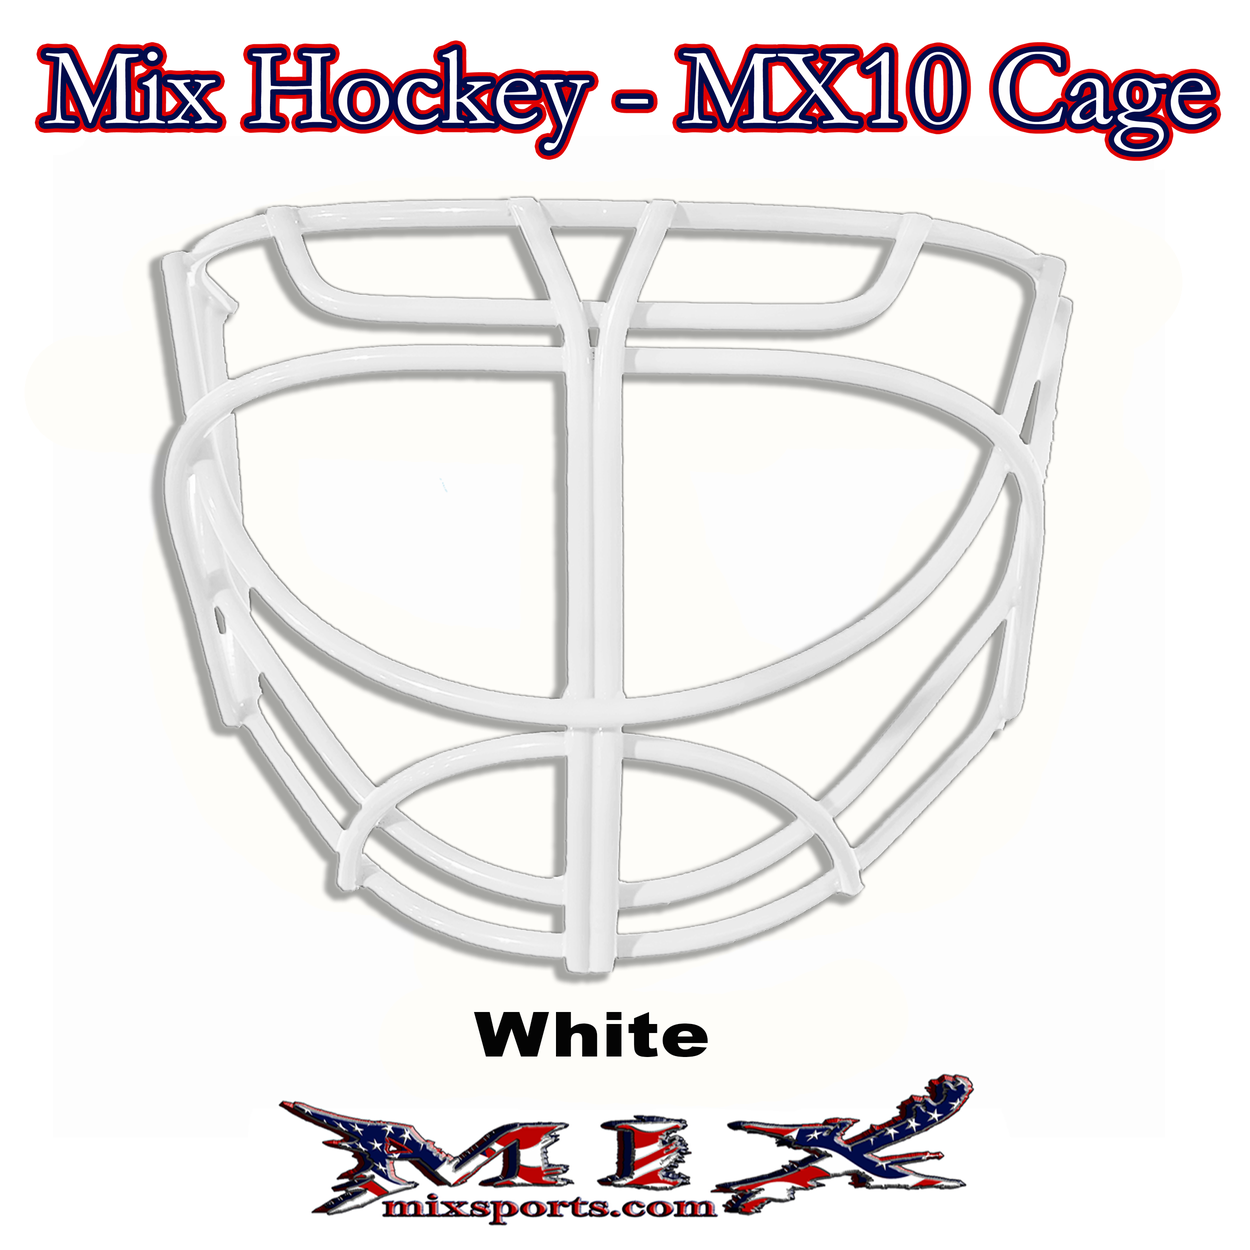 Mix Hockey - MX10 Cat Eye Goalie cage (White) Includes clips and screws